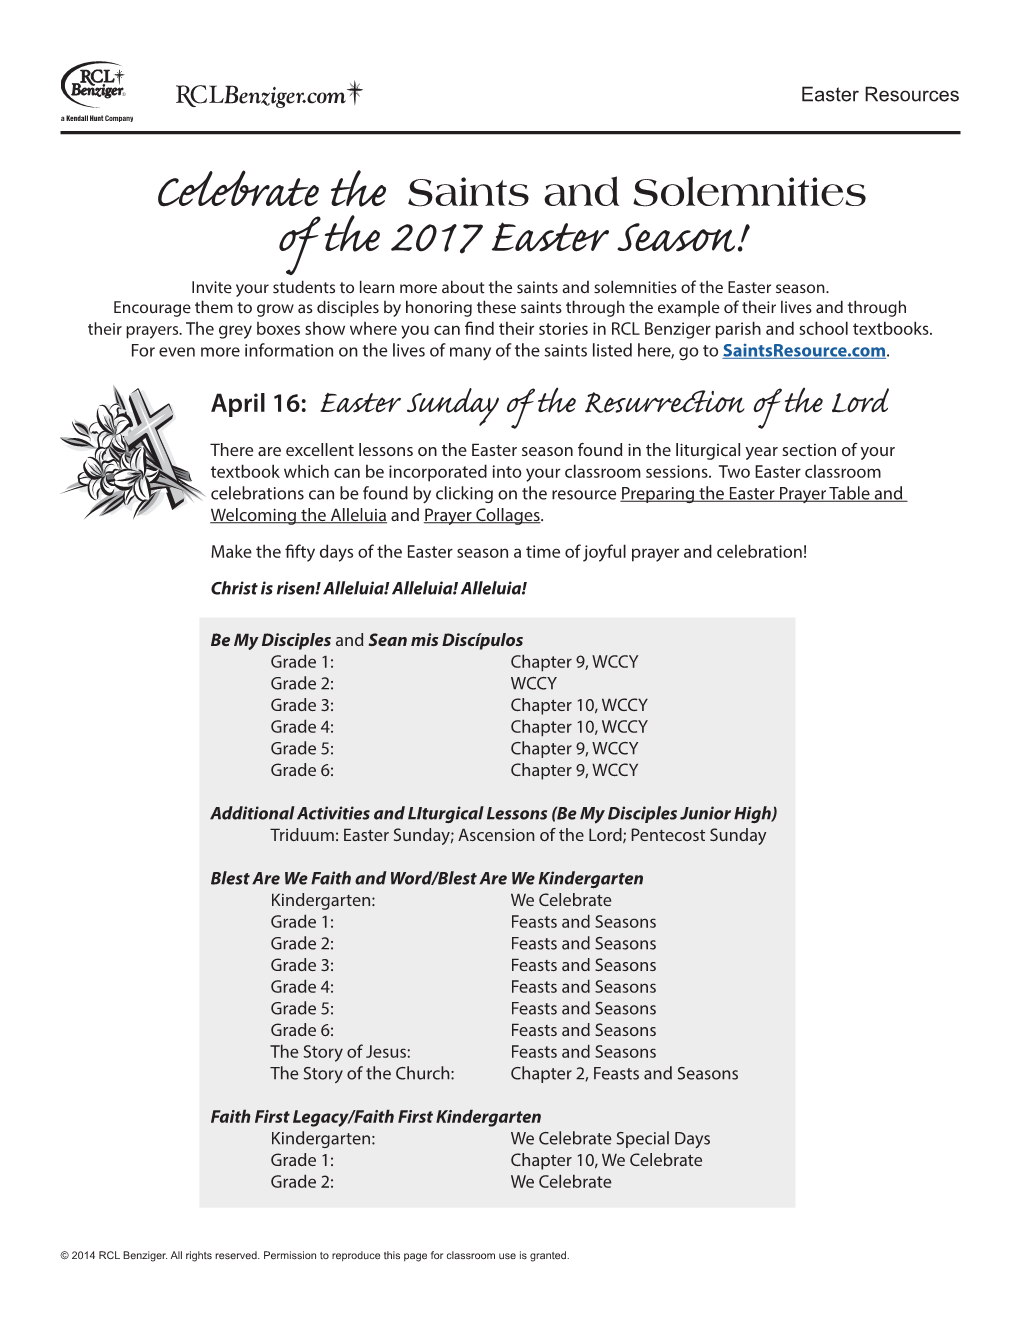 Of the 2017 Easter Season! Invite Your Students to Learn More About the Saints and Solemnities of the Easter Season